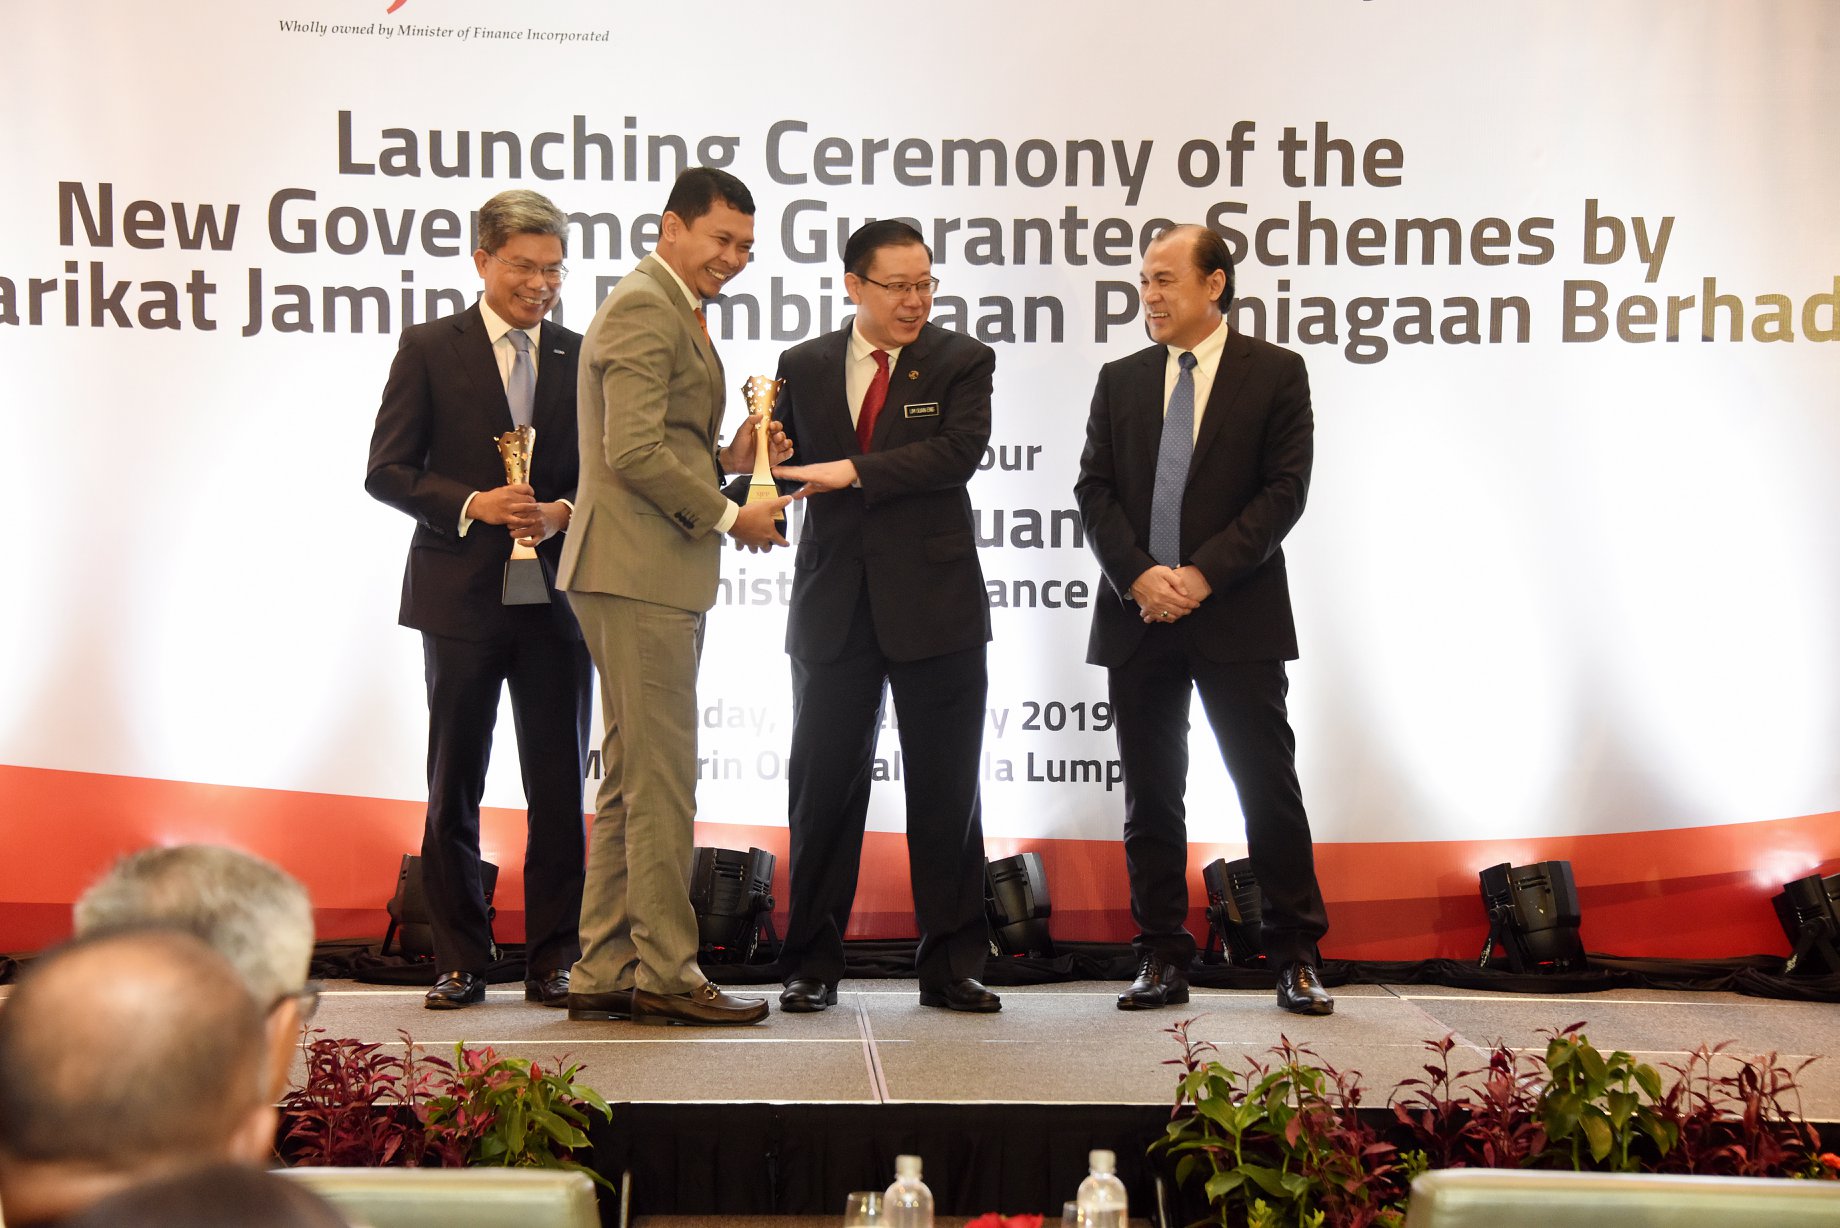 Launching Ceremony of New Government Guarantee Schemes for SMEs & Top Performance Award by SJPP